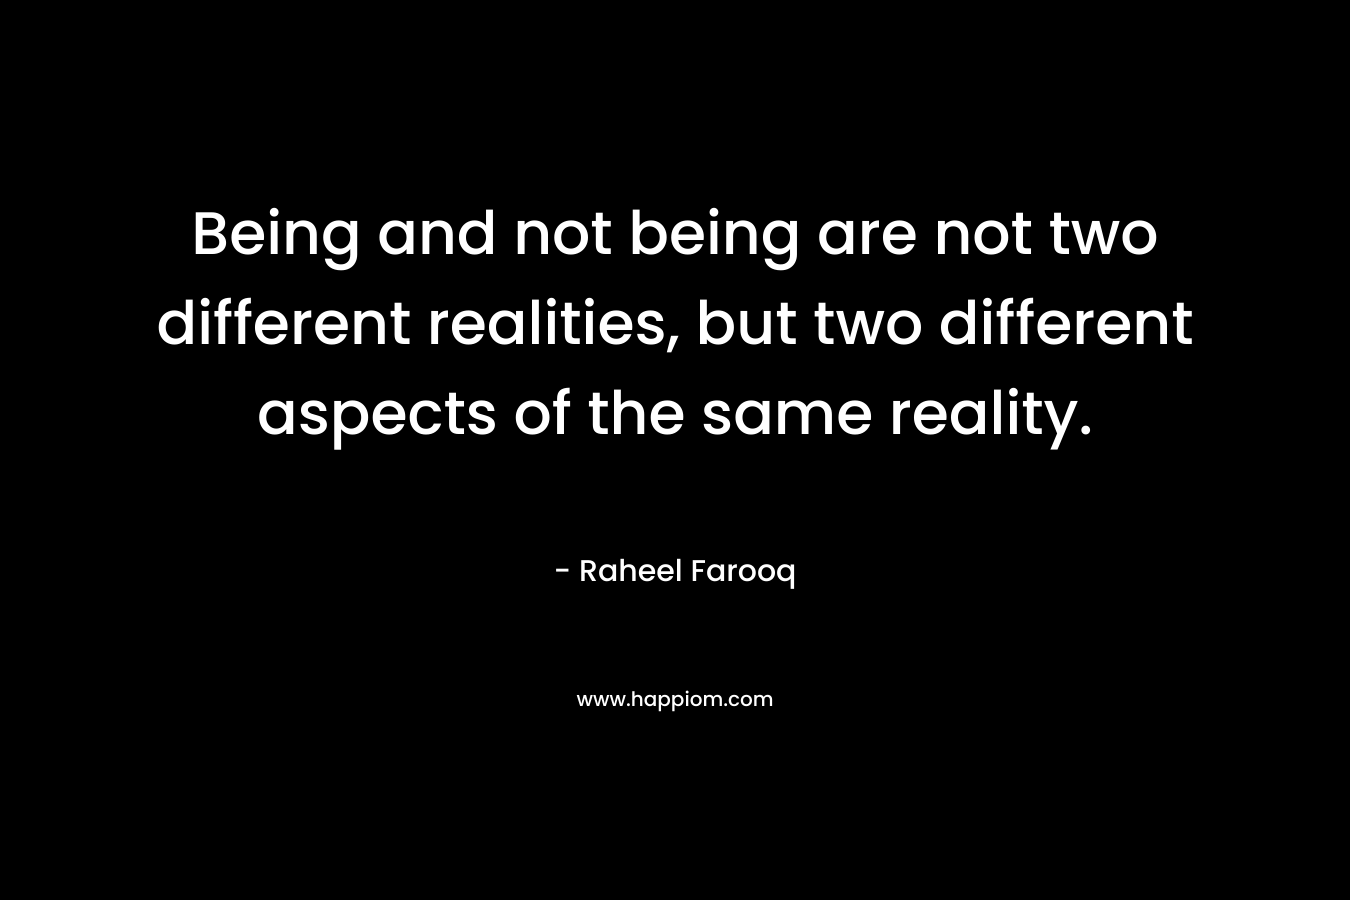 Being and not being are not two different realities, but two different aspects of the same reality.